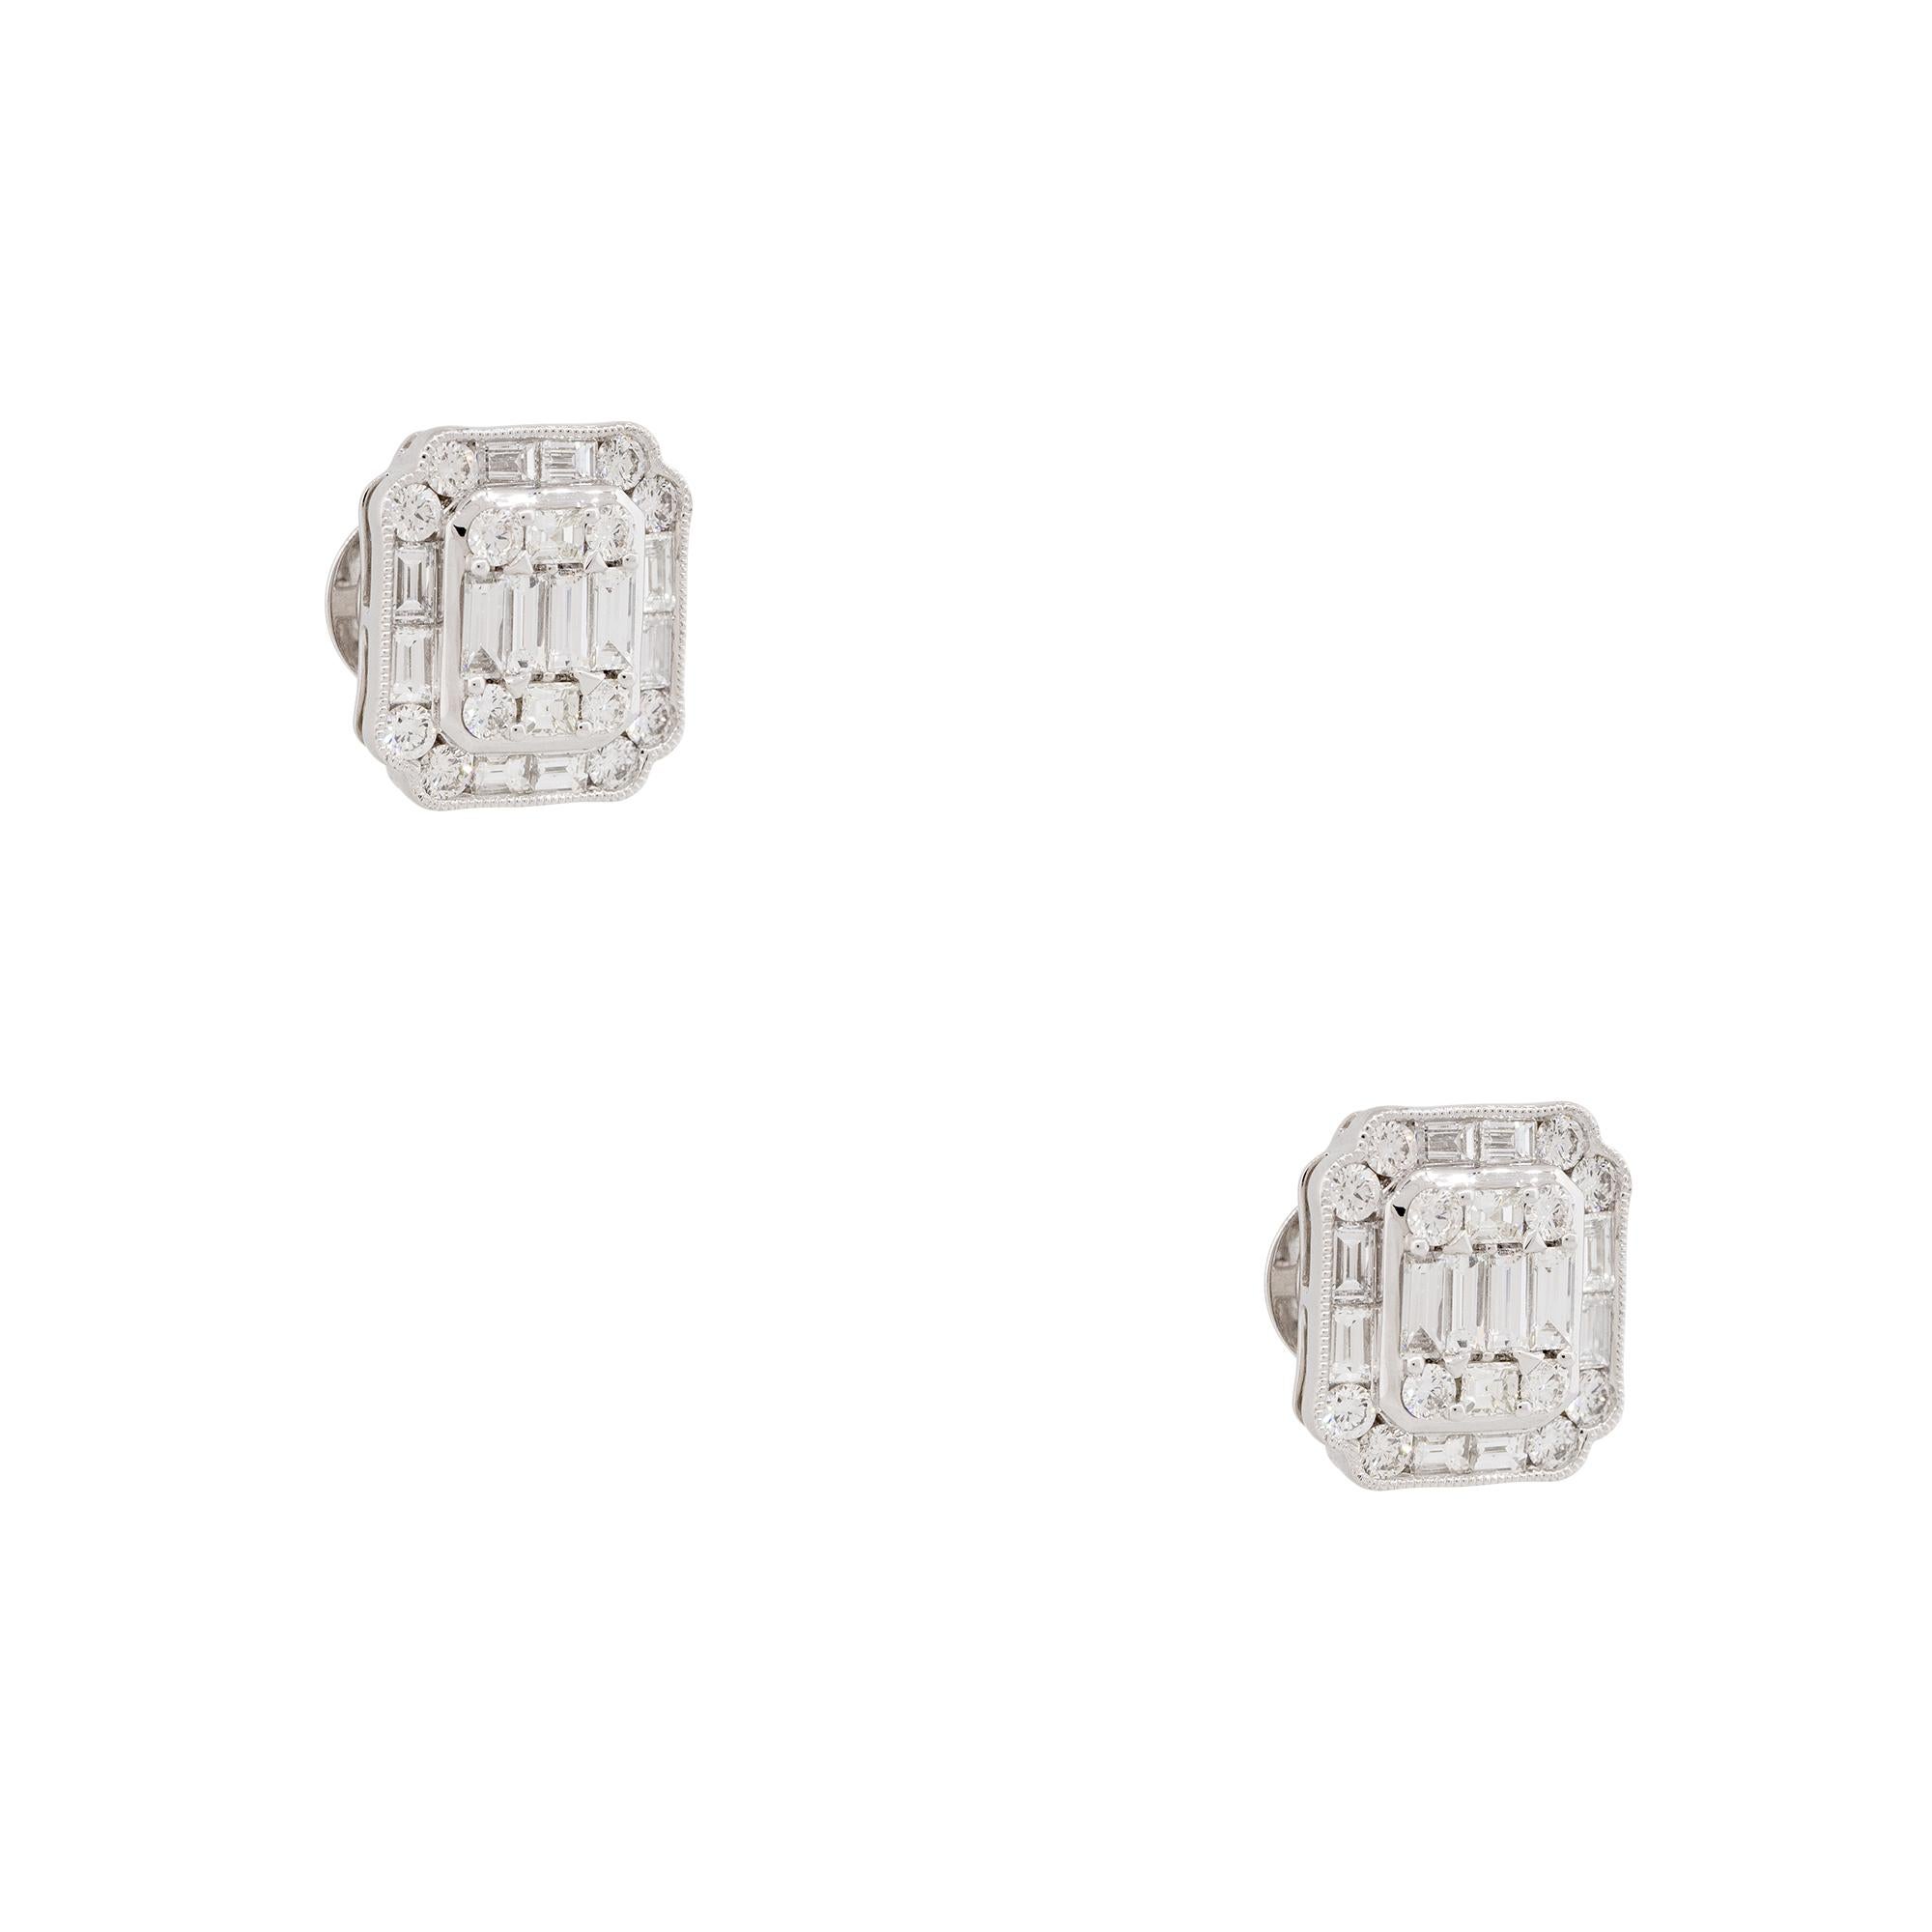 2.98 Carat Mosaic Diamond Square Shaped Earrings 18 Karat In Stock In Excellent Condition For Sale In Boca Raton, FL